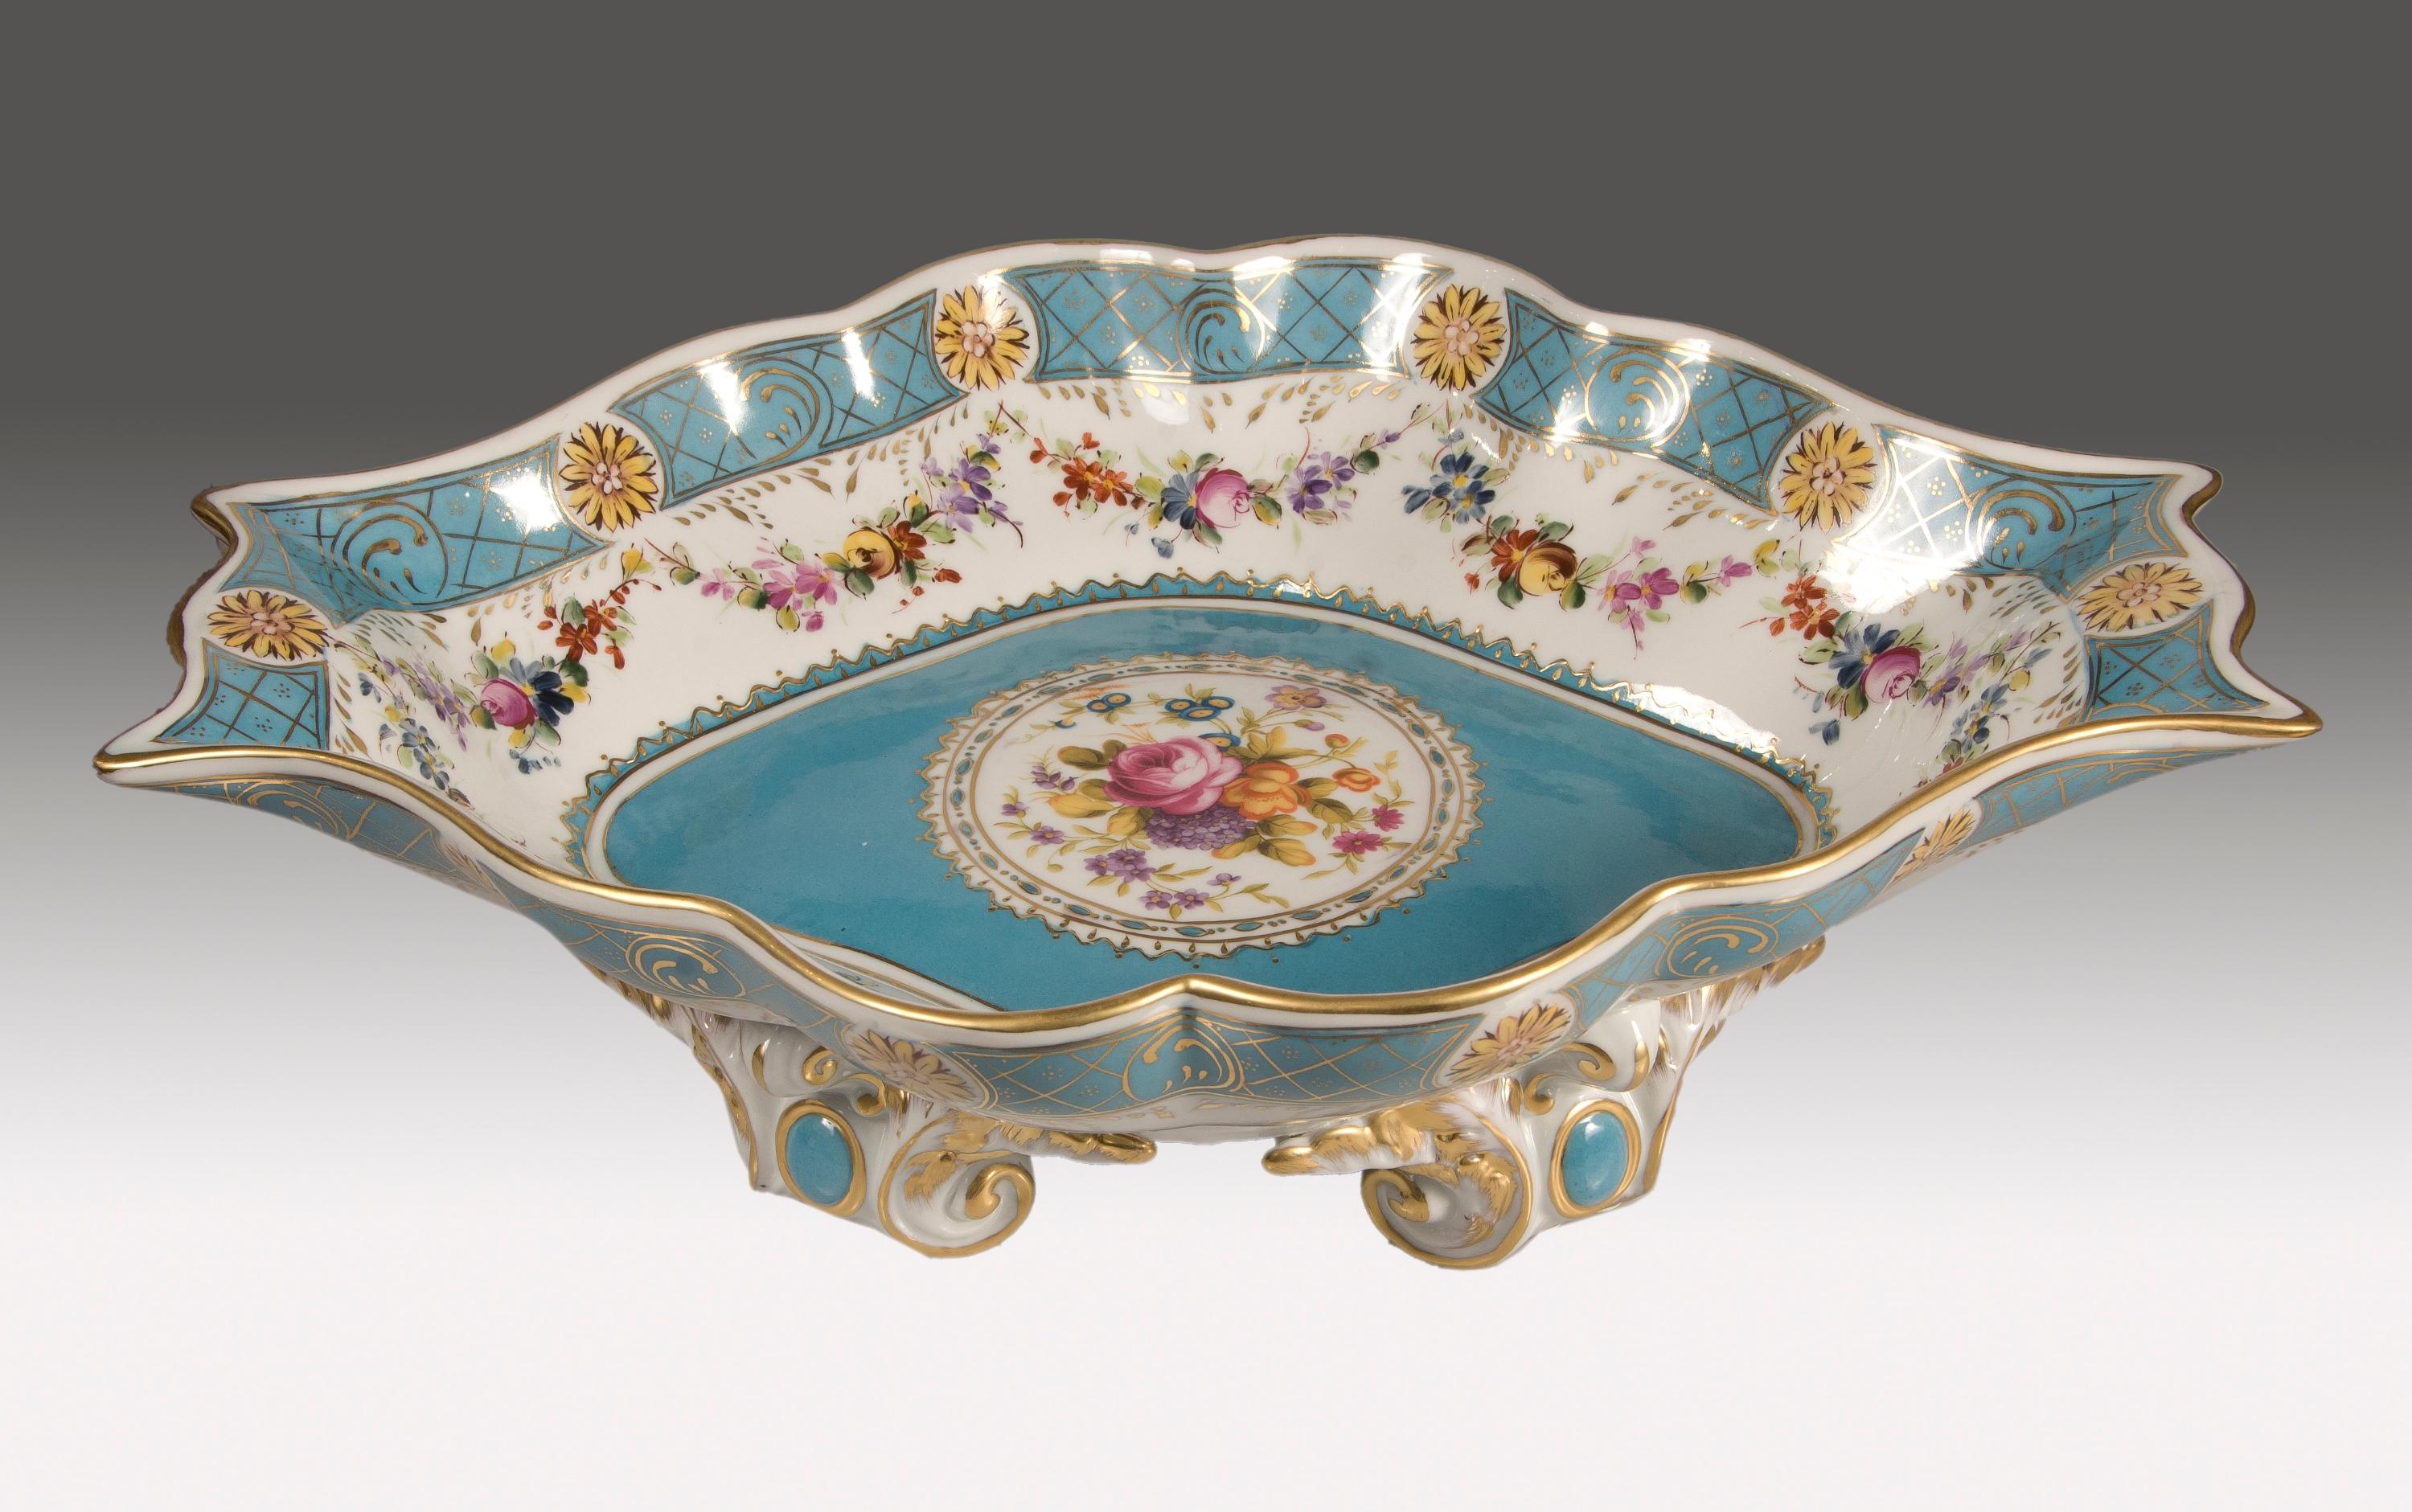 Centerpiece. Glazed porcelain.
Enameled porcelain centerpiece slightly raised on four volute-shaped legs and plain blue mirrors in front. The curved profiles, extended towards the neck, remind of examples inspired by the Rococo, while the